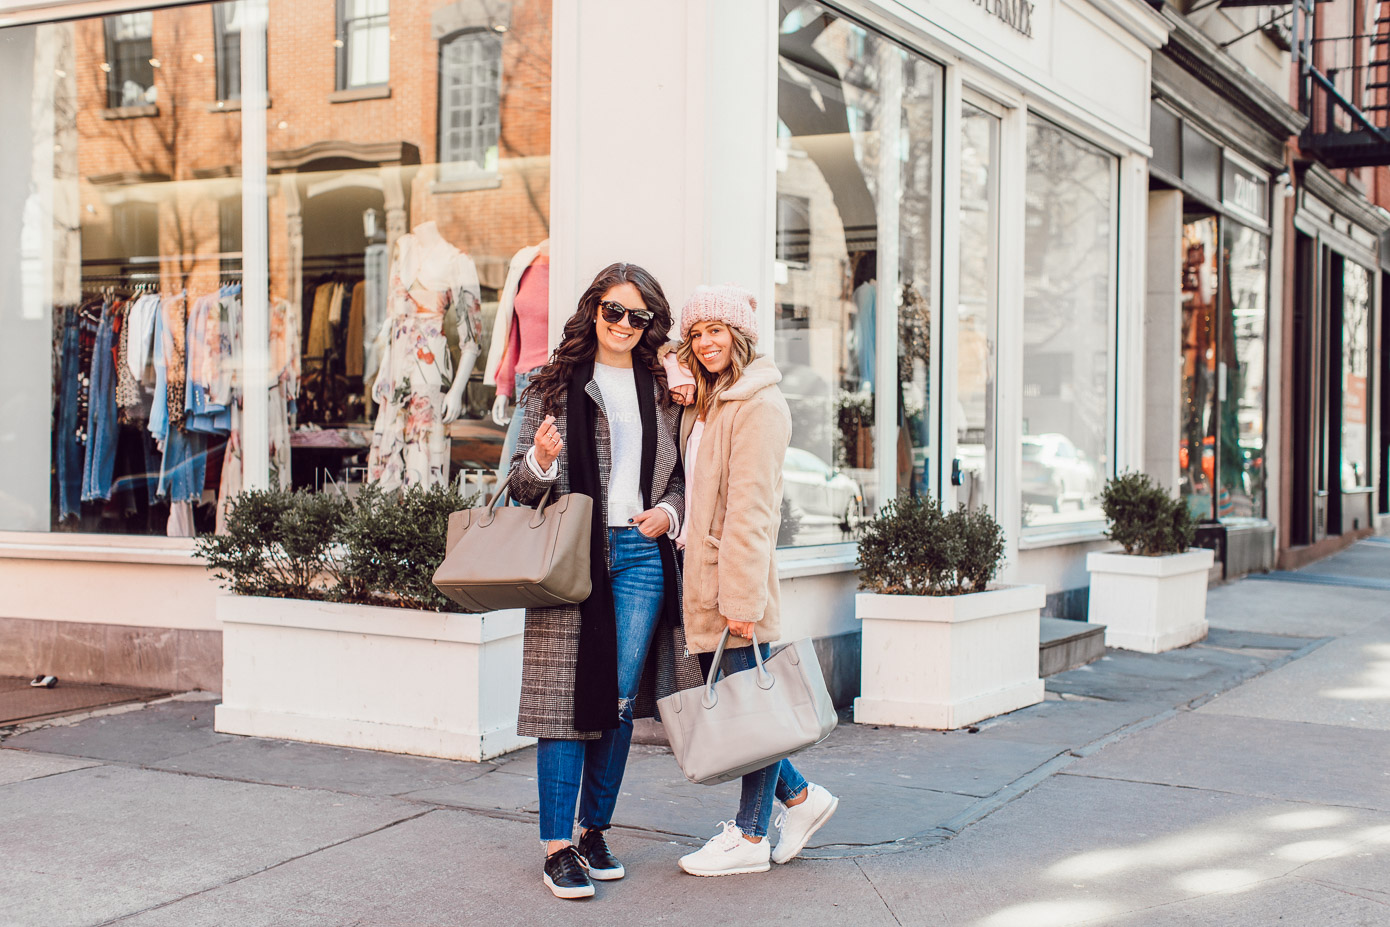 Best Friend Sweatshirts, Brunette the Label Sweatshirts | How to Coordinate with Your Best Friend featured on Louella Reese